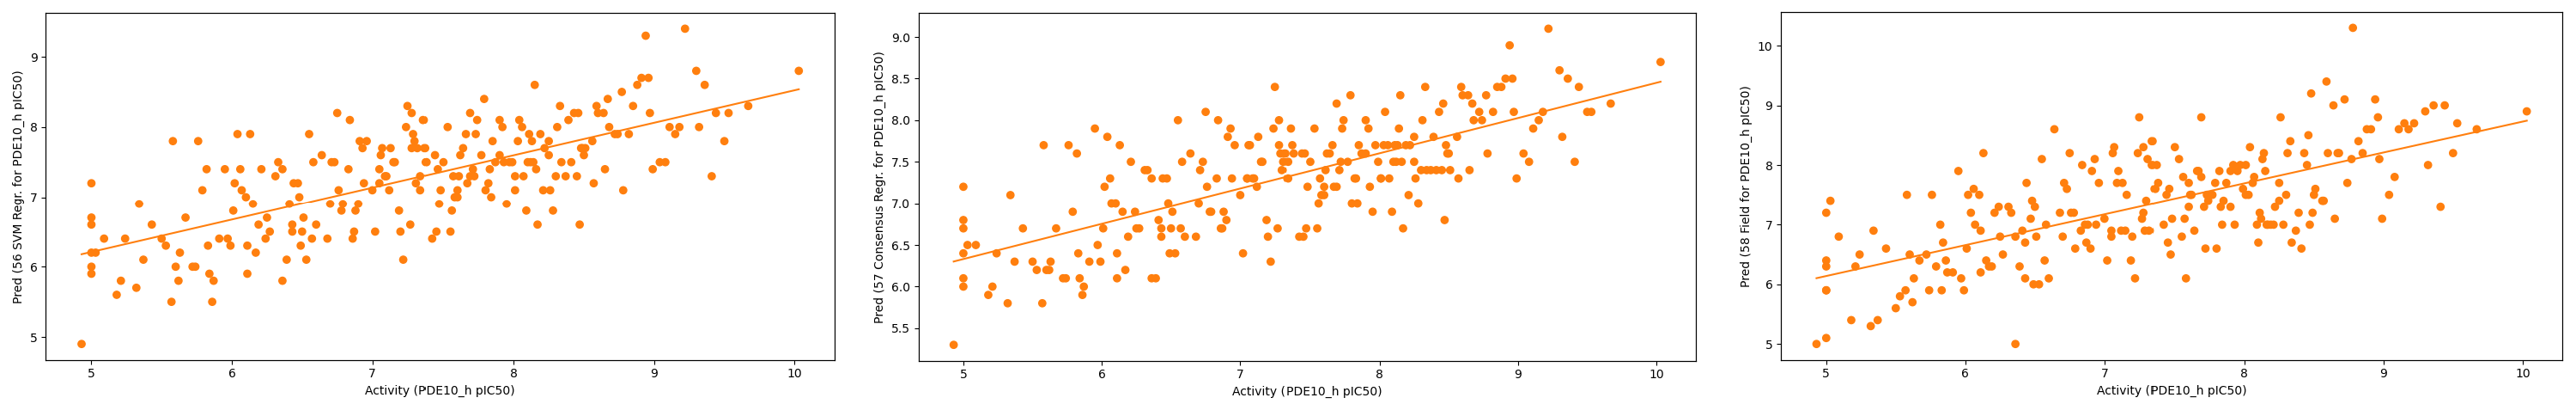 Plots of predicted vs actual activity for the validation set in the 'Normal' alignment.